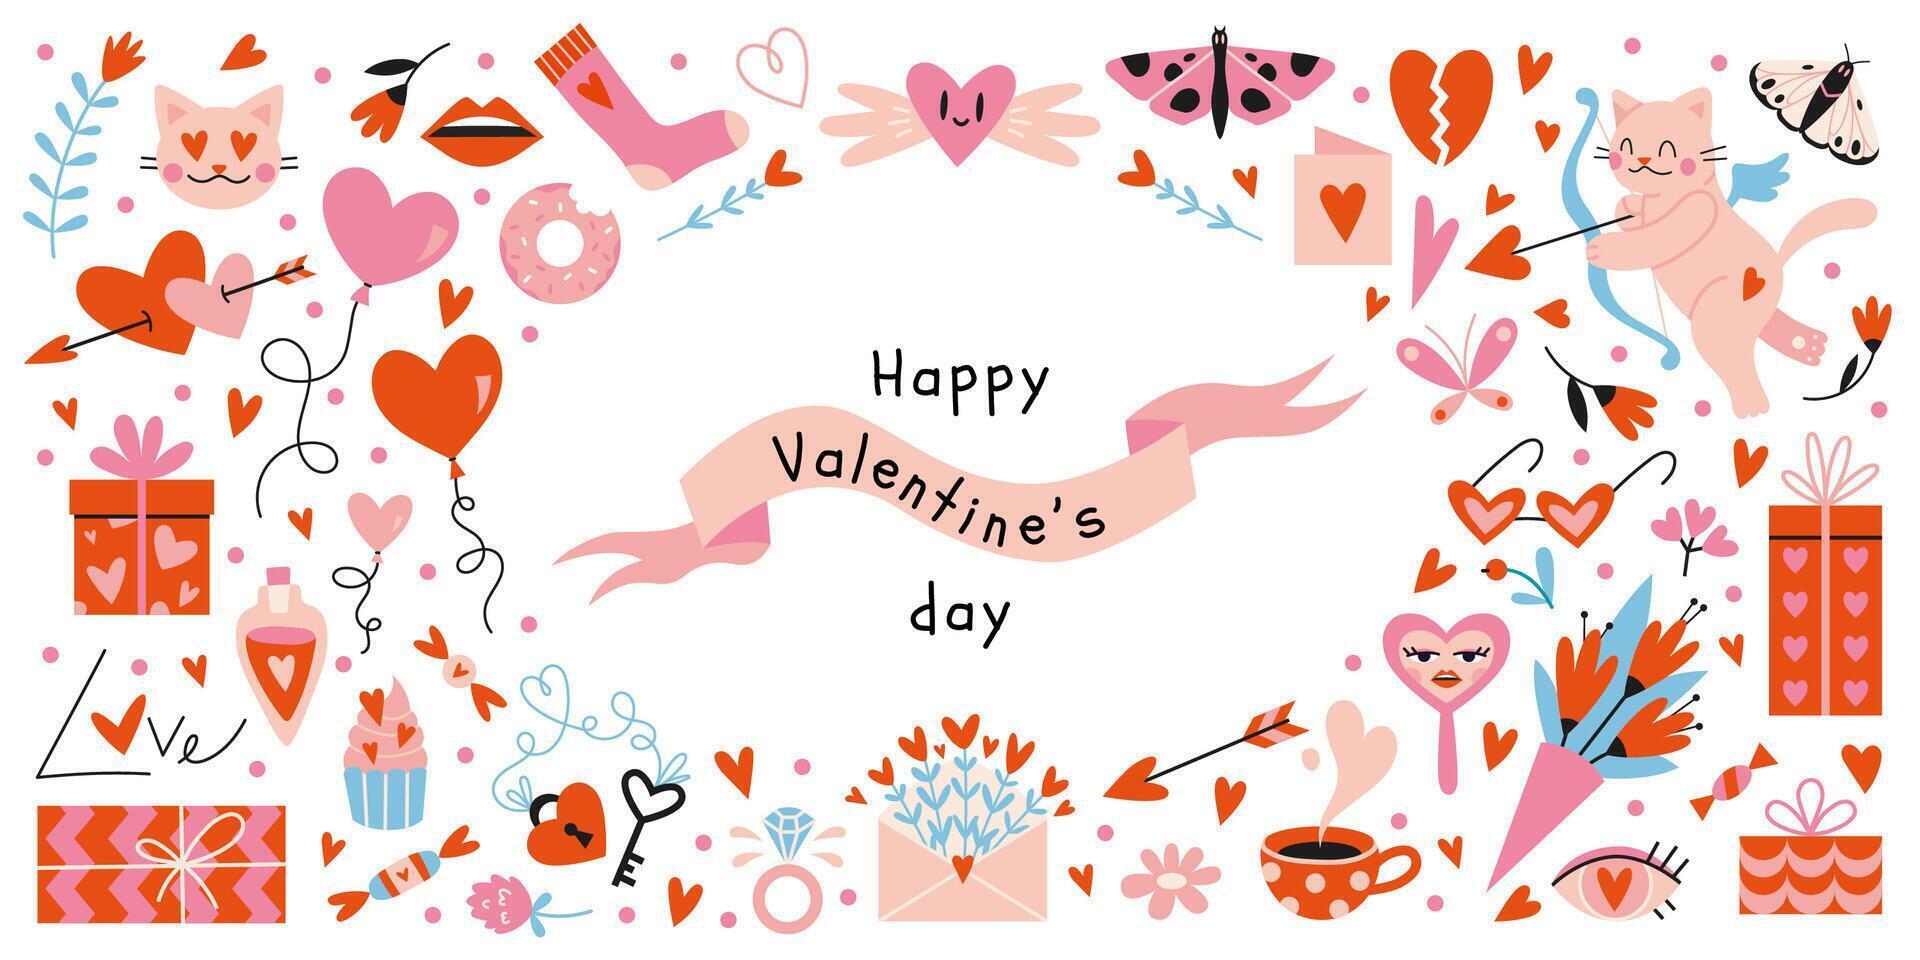 Happy Valentine's Day big set. Many various romantic objects like hearts, balloons, cupid, gifts and sweets, cartoon style. Trendy modern vector illustration isolated on white, hand drawn, flat